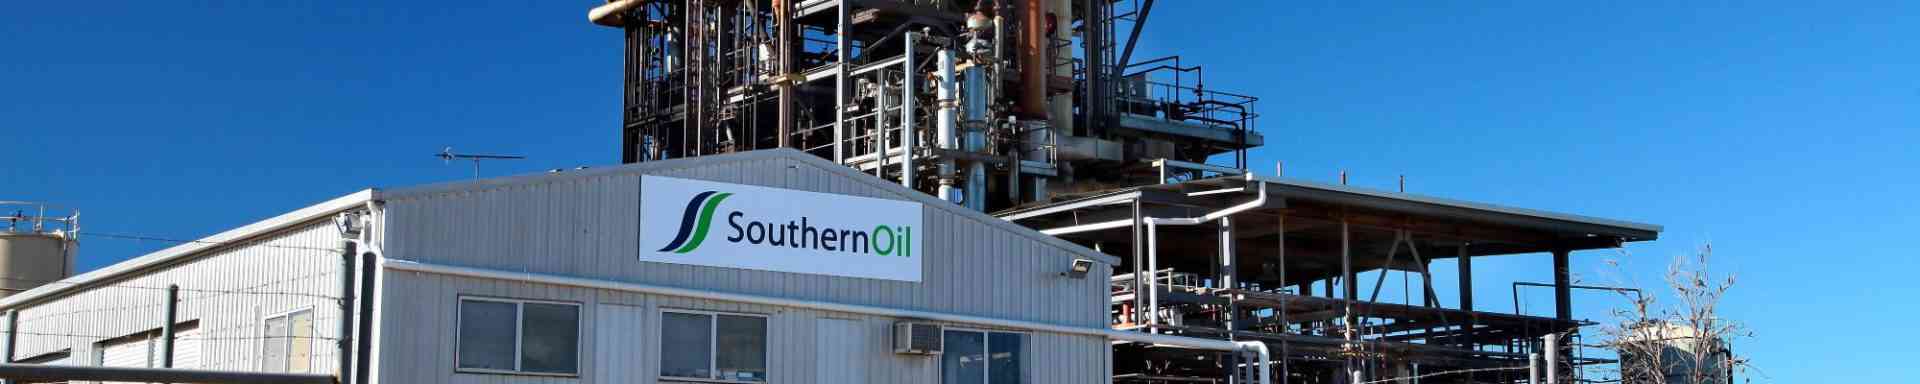 southern oil banner